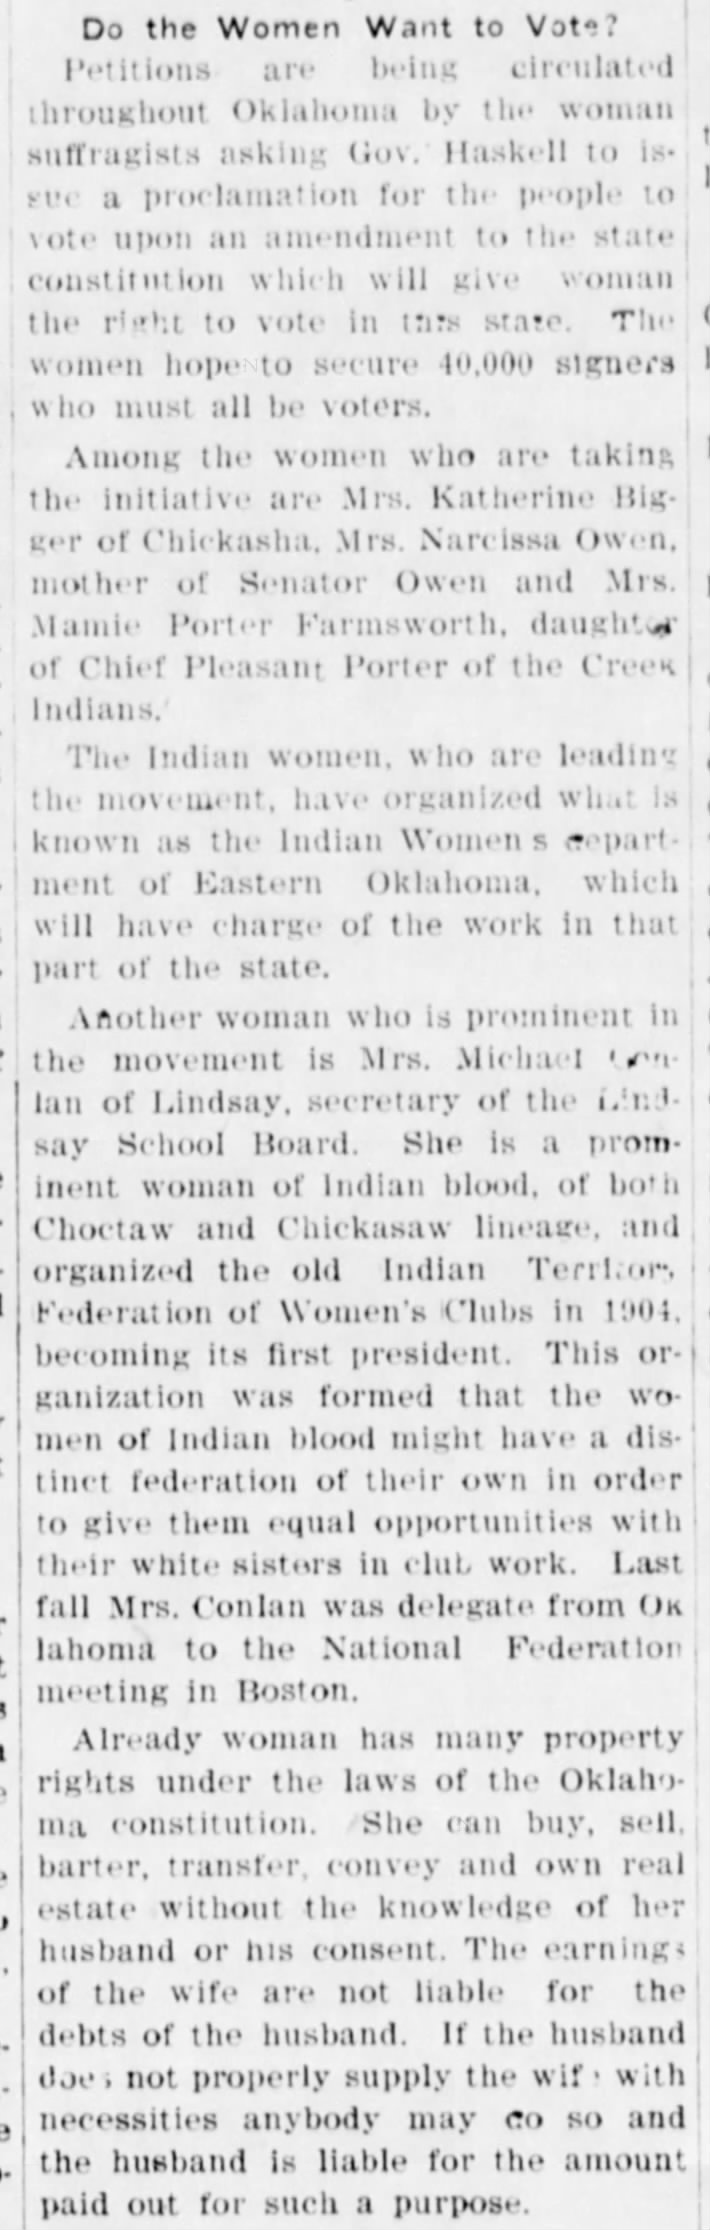 Do the Women Want to Vote? The Daily Ardmoreite (Ardmore, Oklahoma) May 24, 1909, p 3